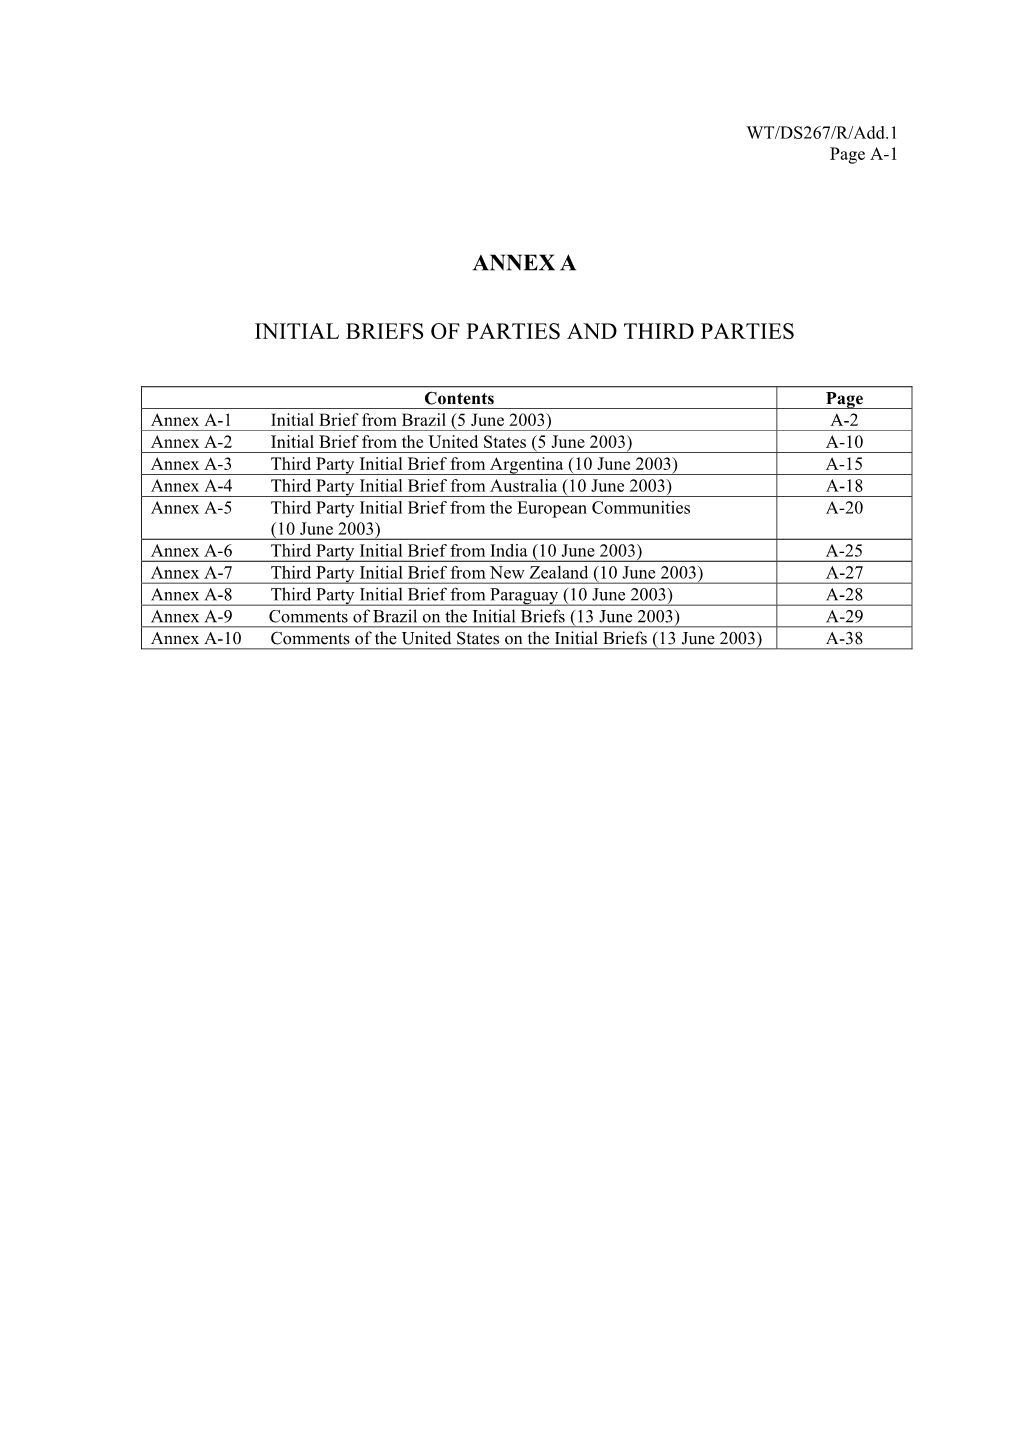 Annex a Initial Briefs of Parties and Third Parties